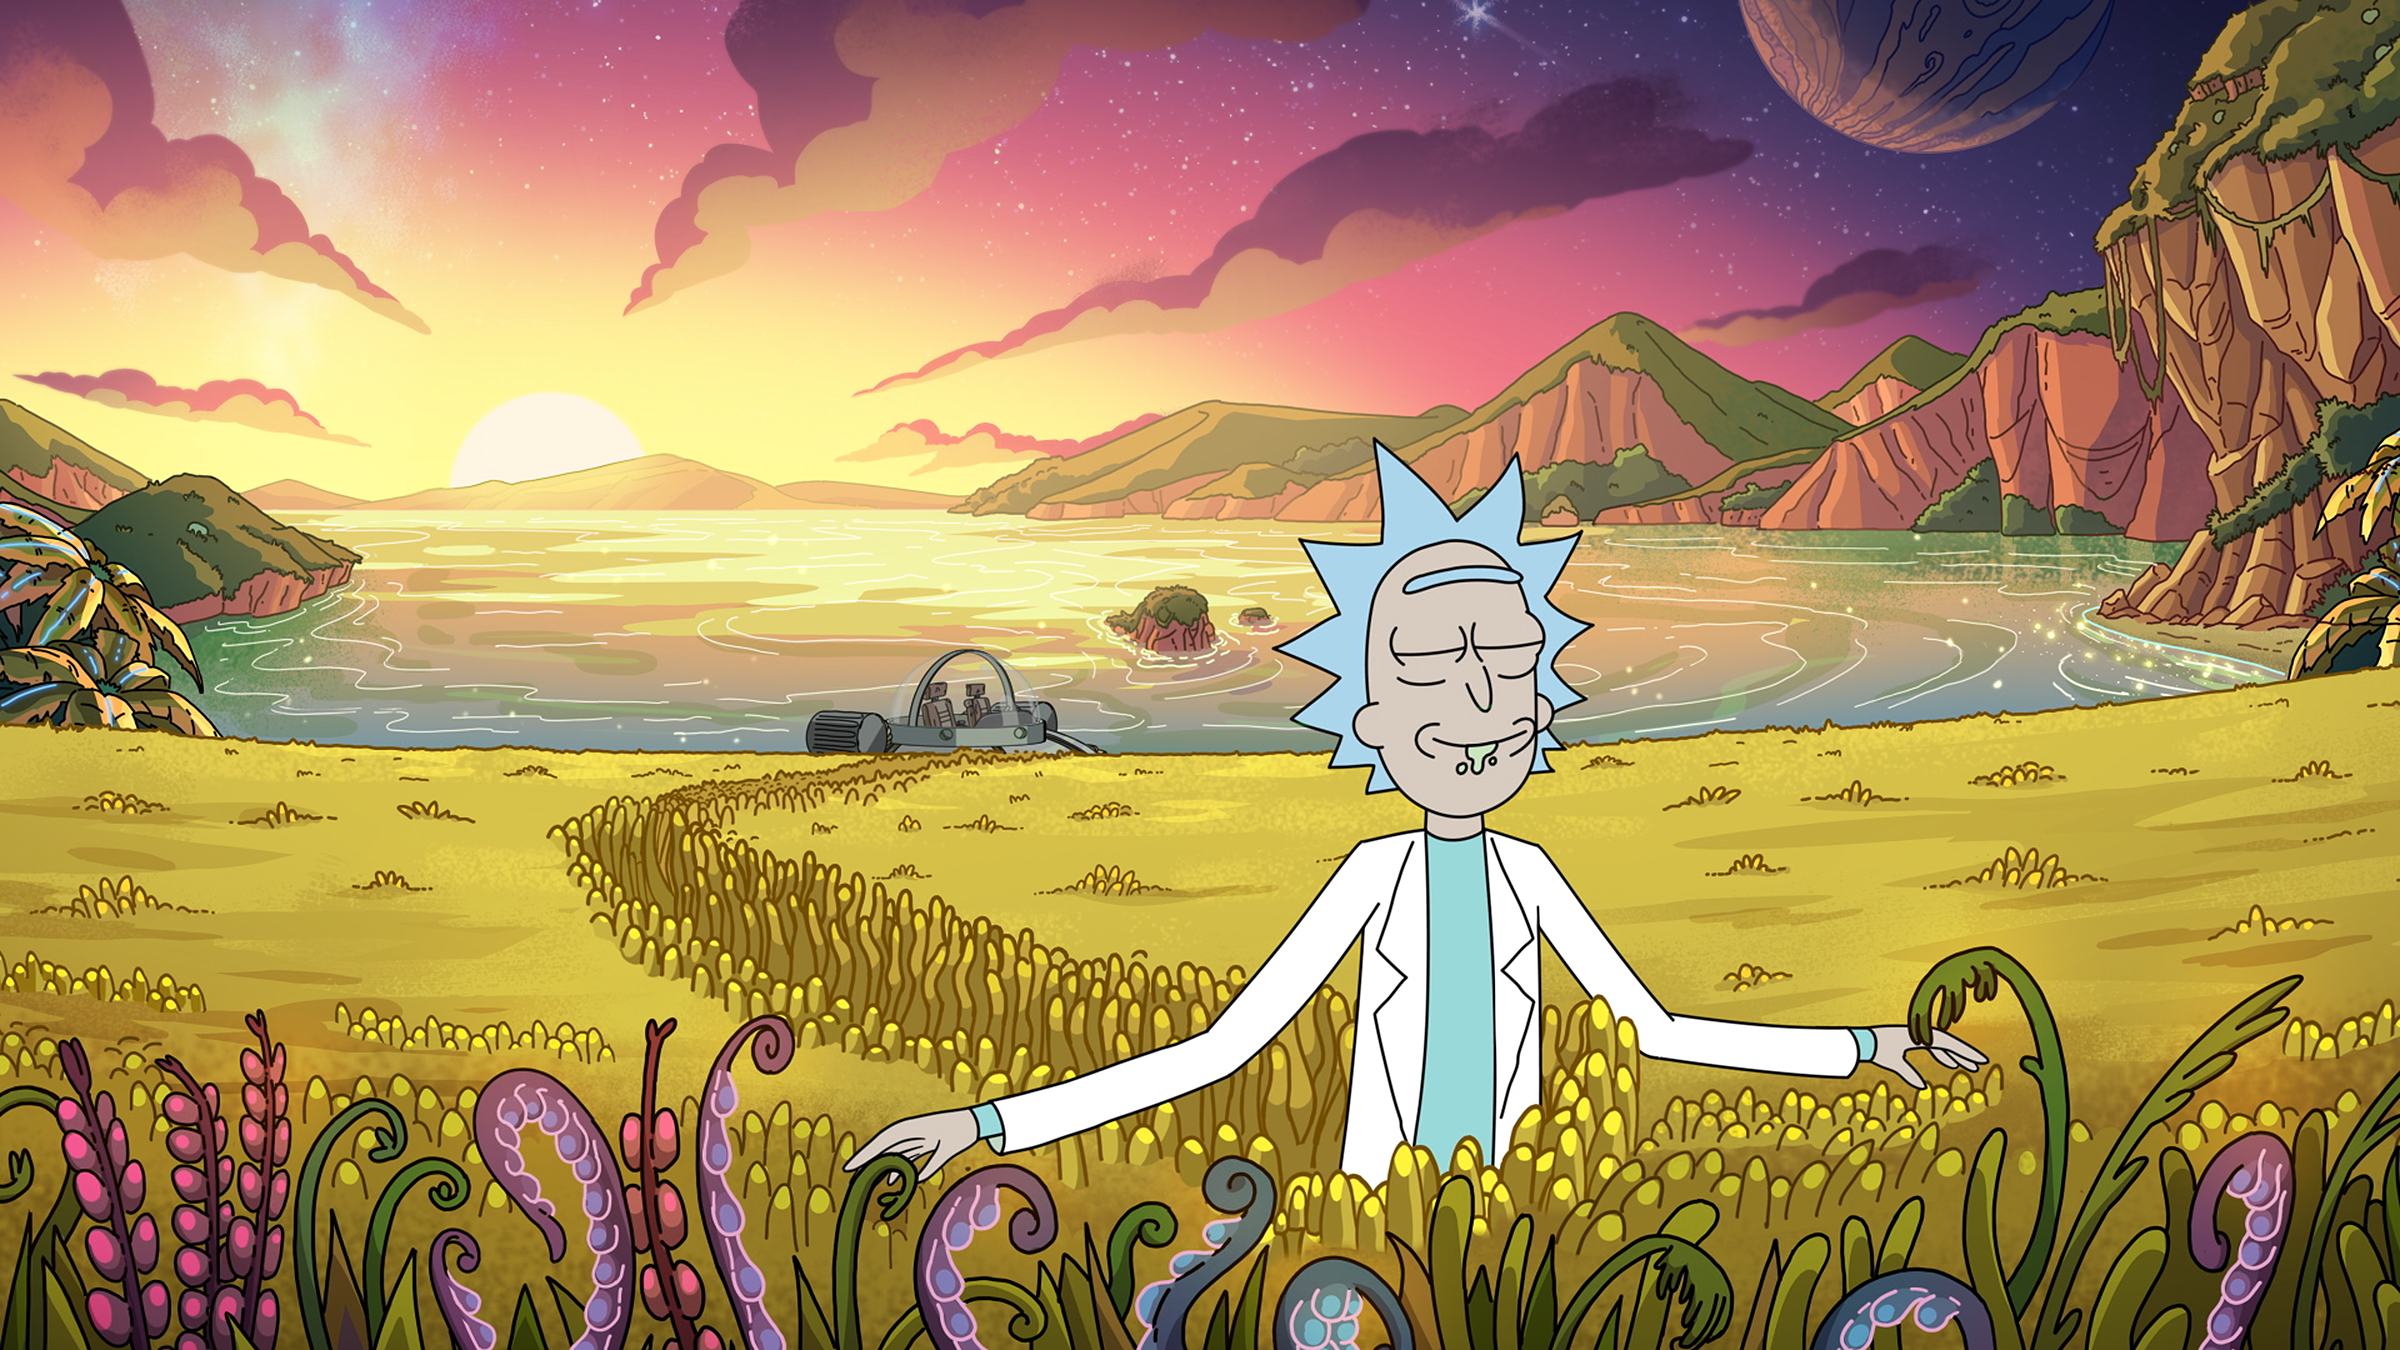 Rick and Morty season 4 premieres with a thrilling multiversal time-twister